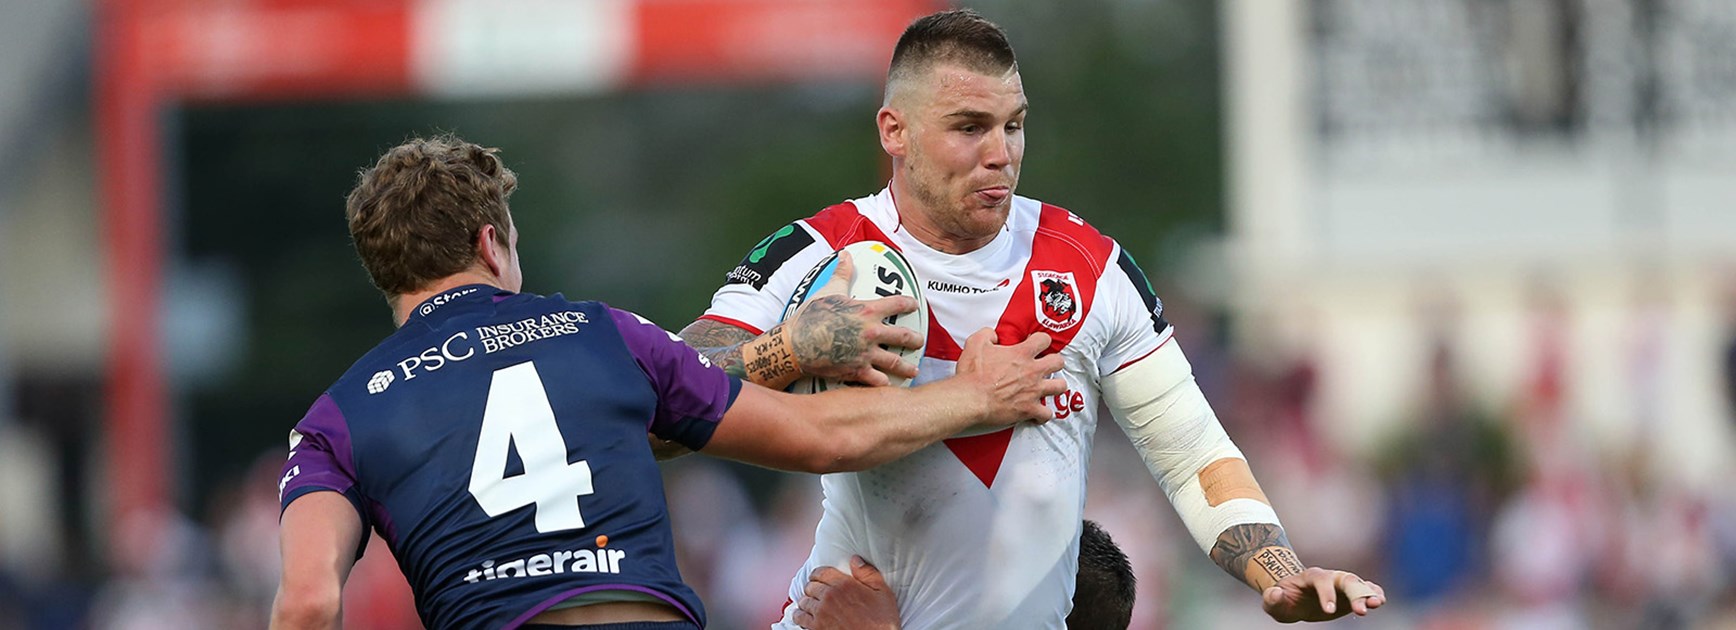 Dragons fullback Josh Dugan was injured in his side's scrappy loss to Melbourne Storm in Round 1.